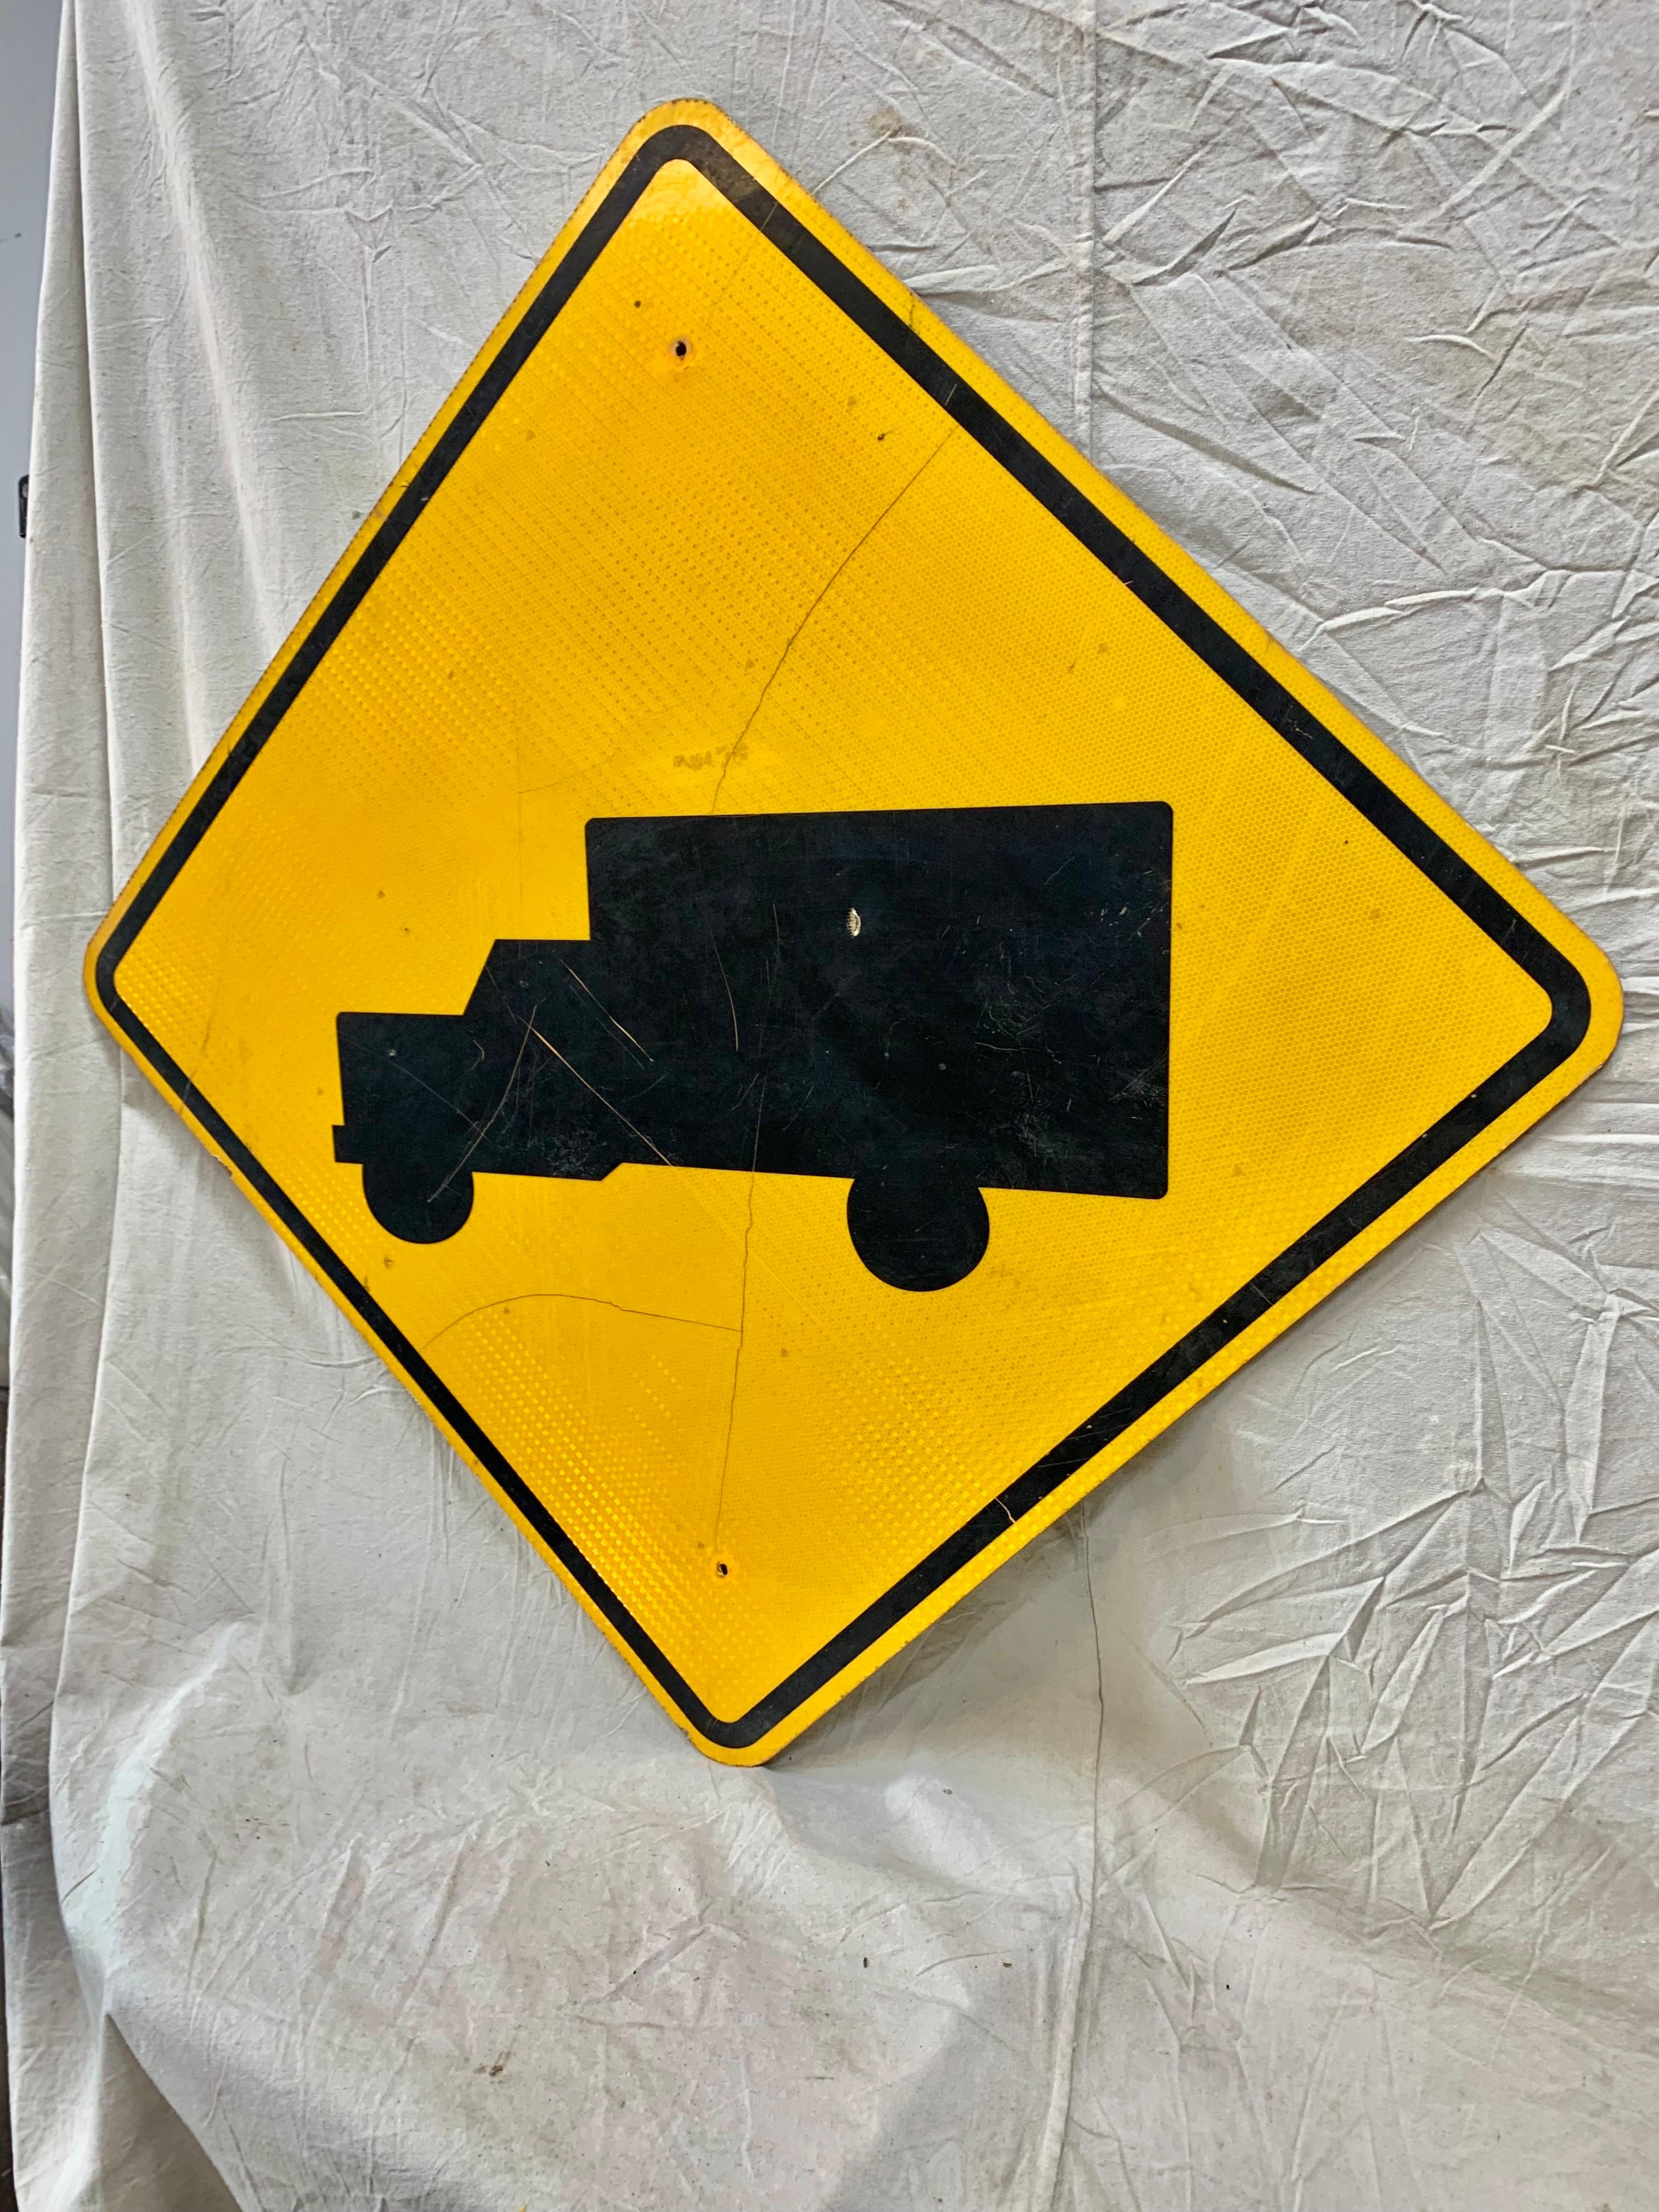 a yellow diamond shaped sign with a black picture of a truck on it means